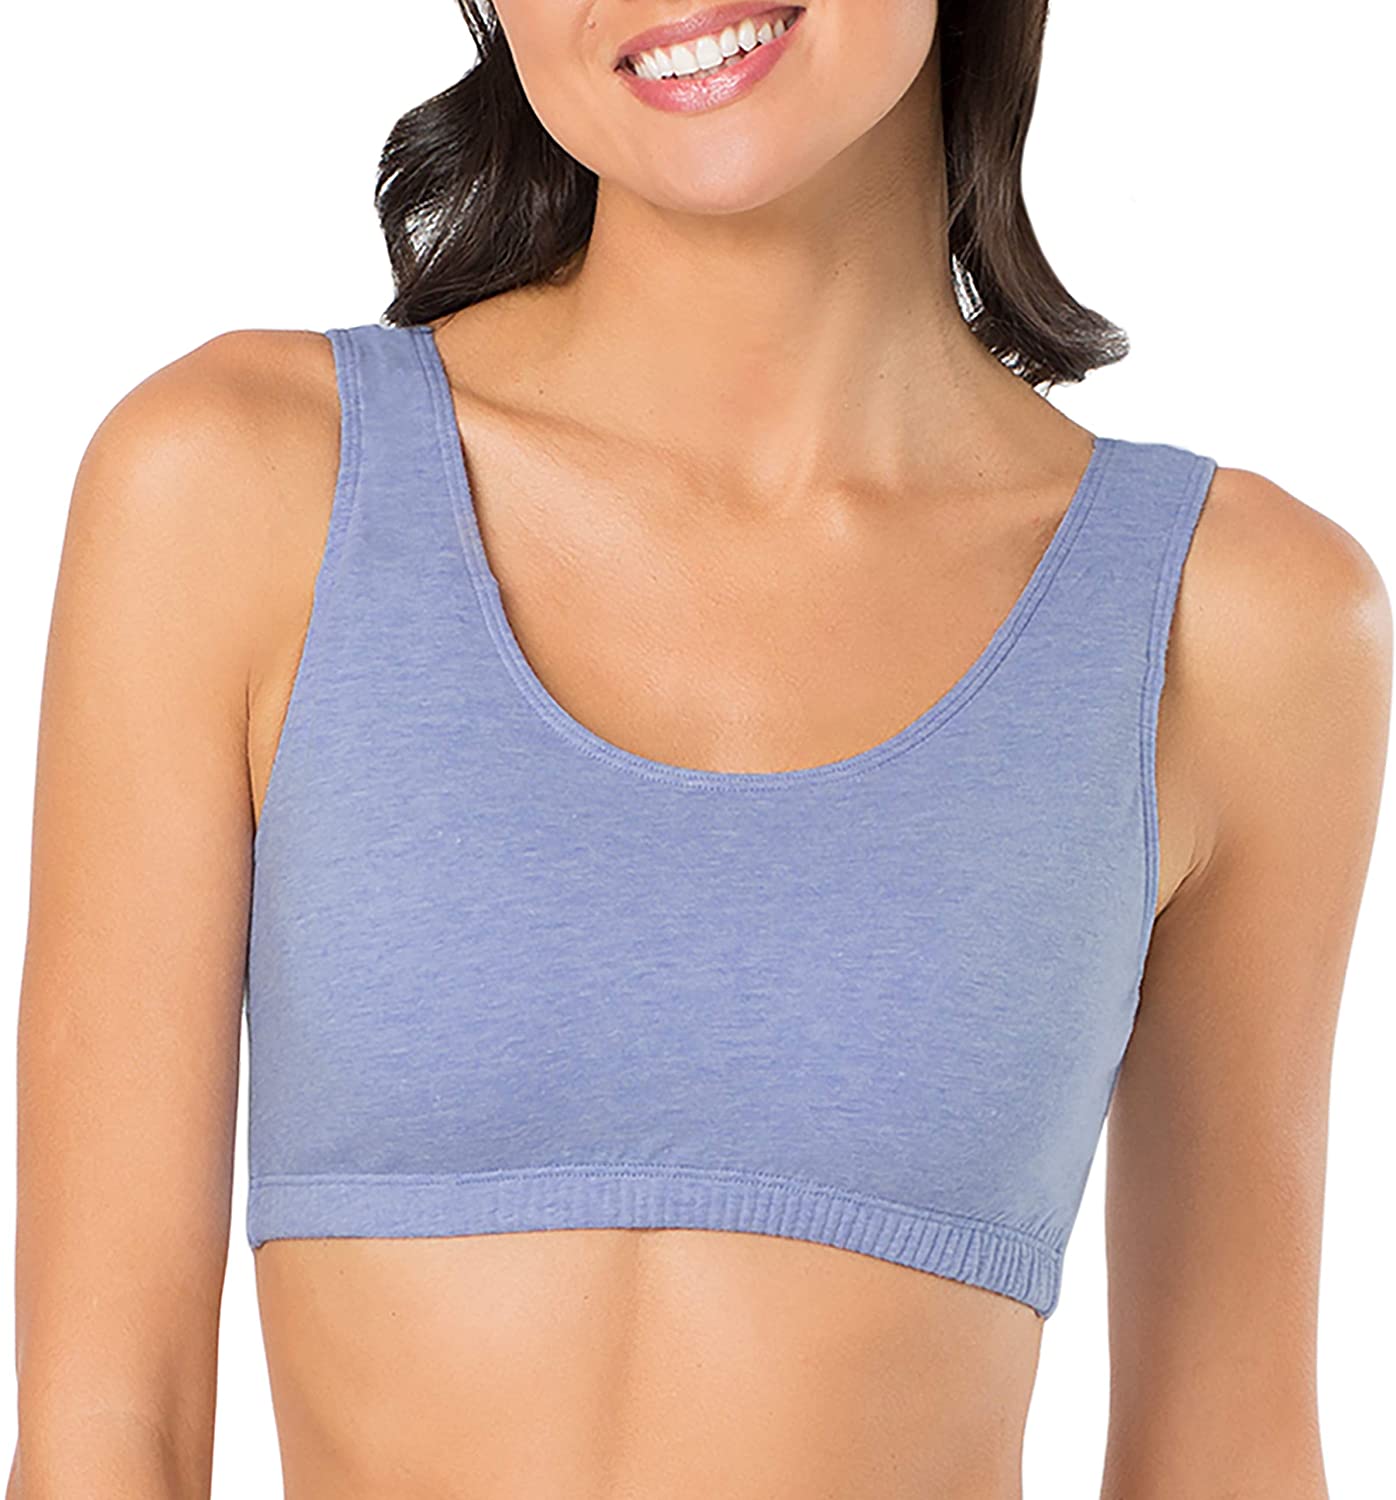 Pack of 3 Fruit of the Loom Womens Built-Up Sports Bra